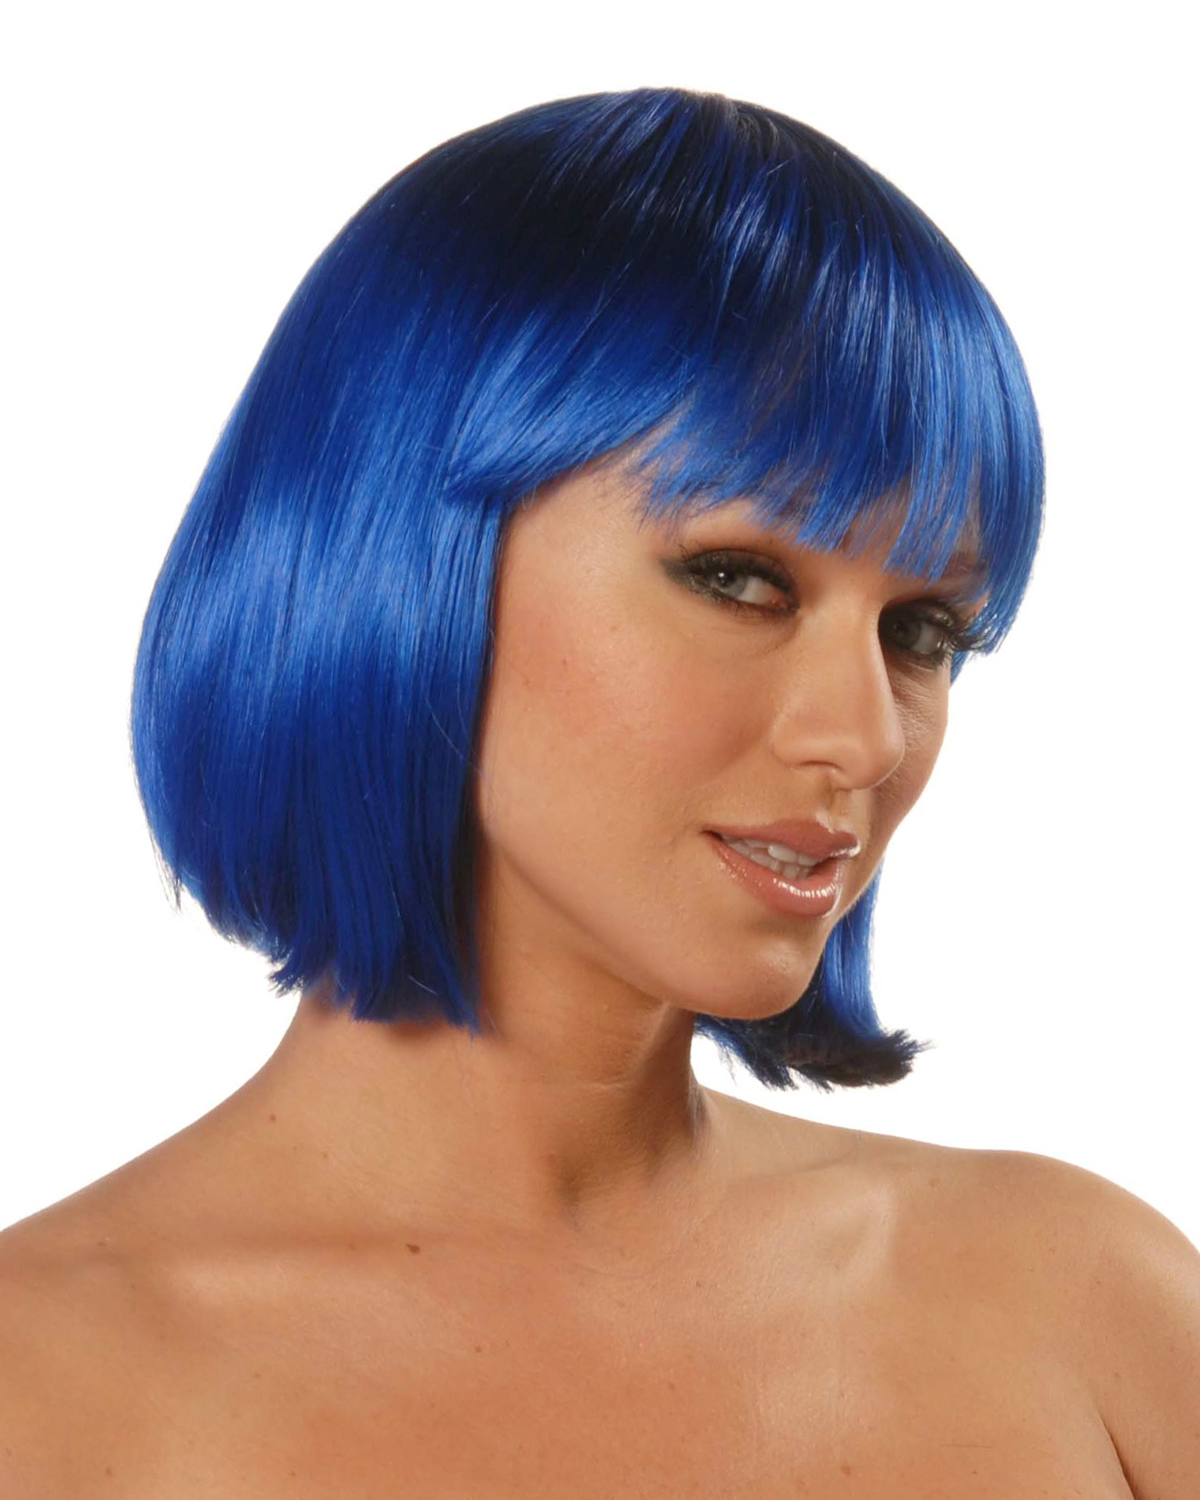 wigs for sale near me cosplay wigs